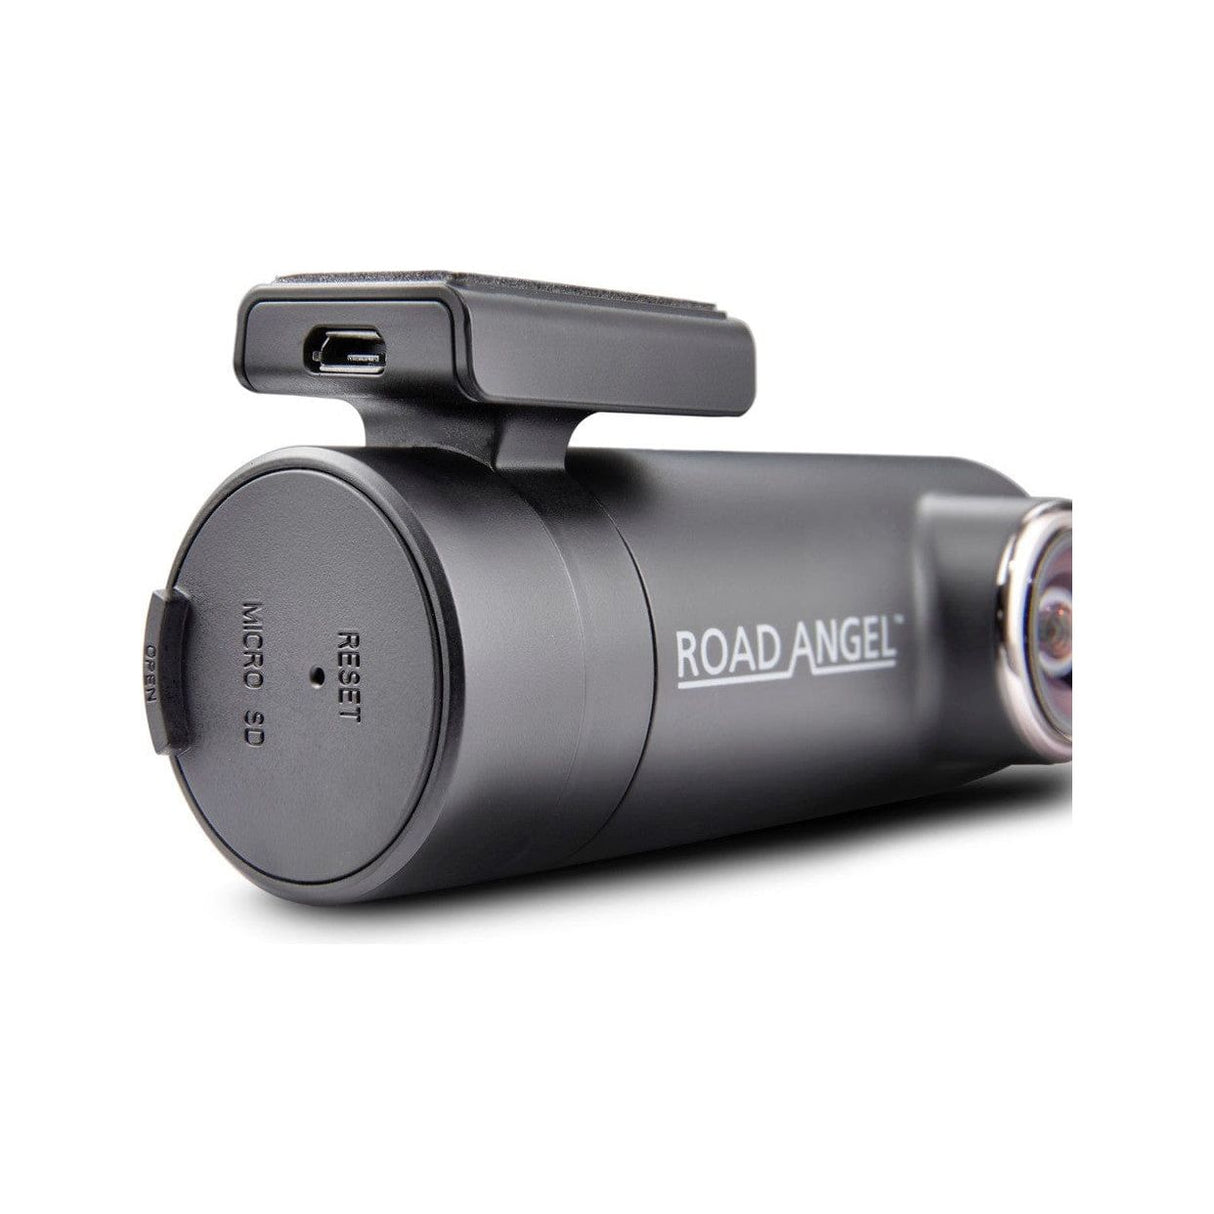 Road Angel Road Safety Halo Drive Dash Cam, 2K 1440p 140° Camera, with Super Night View, Built-In Wi-Fi, Winter Mode